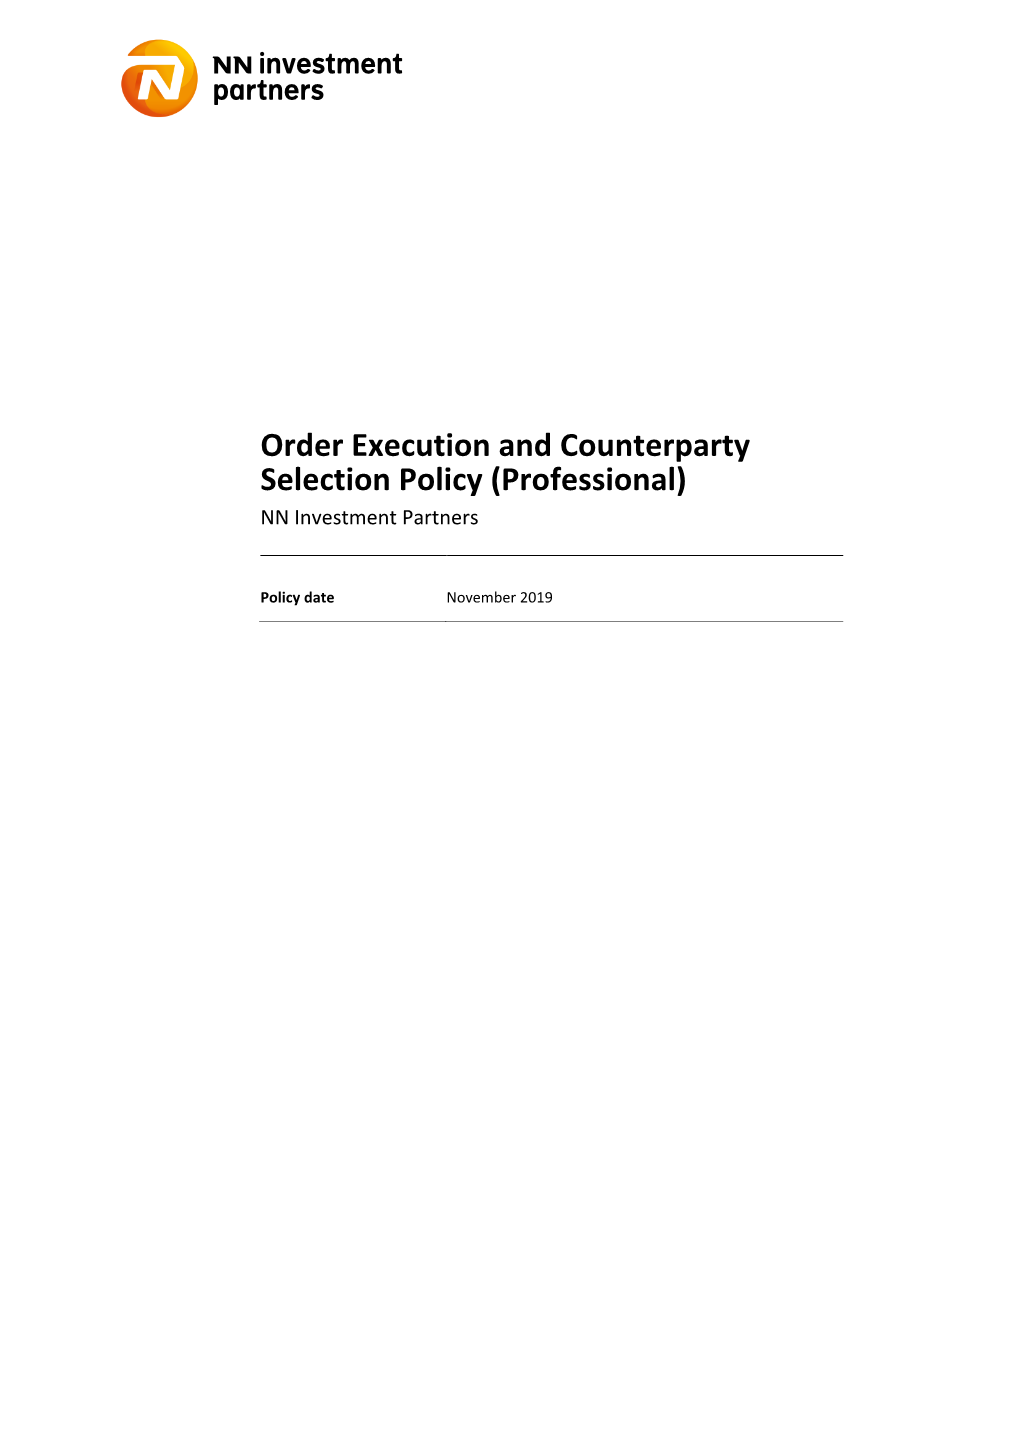 Order Execution and Counterparty Selection Policy (Professional) NN Investment Partners